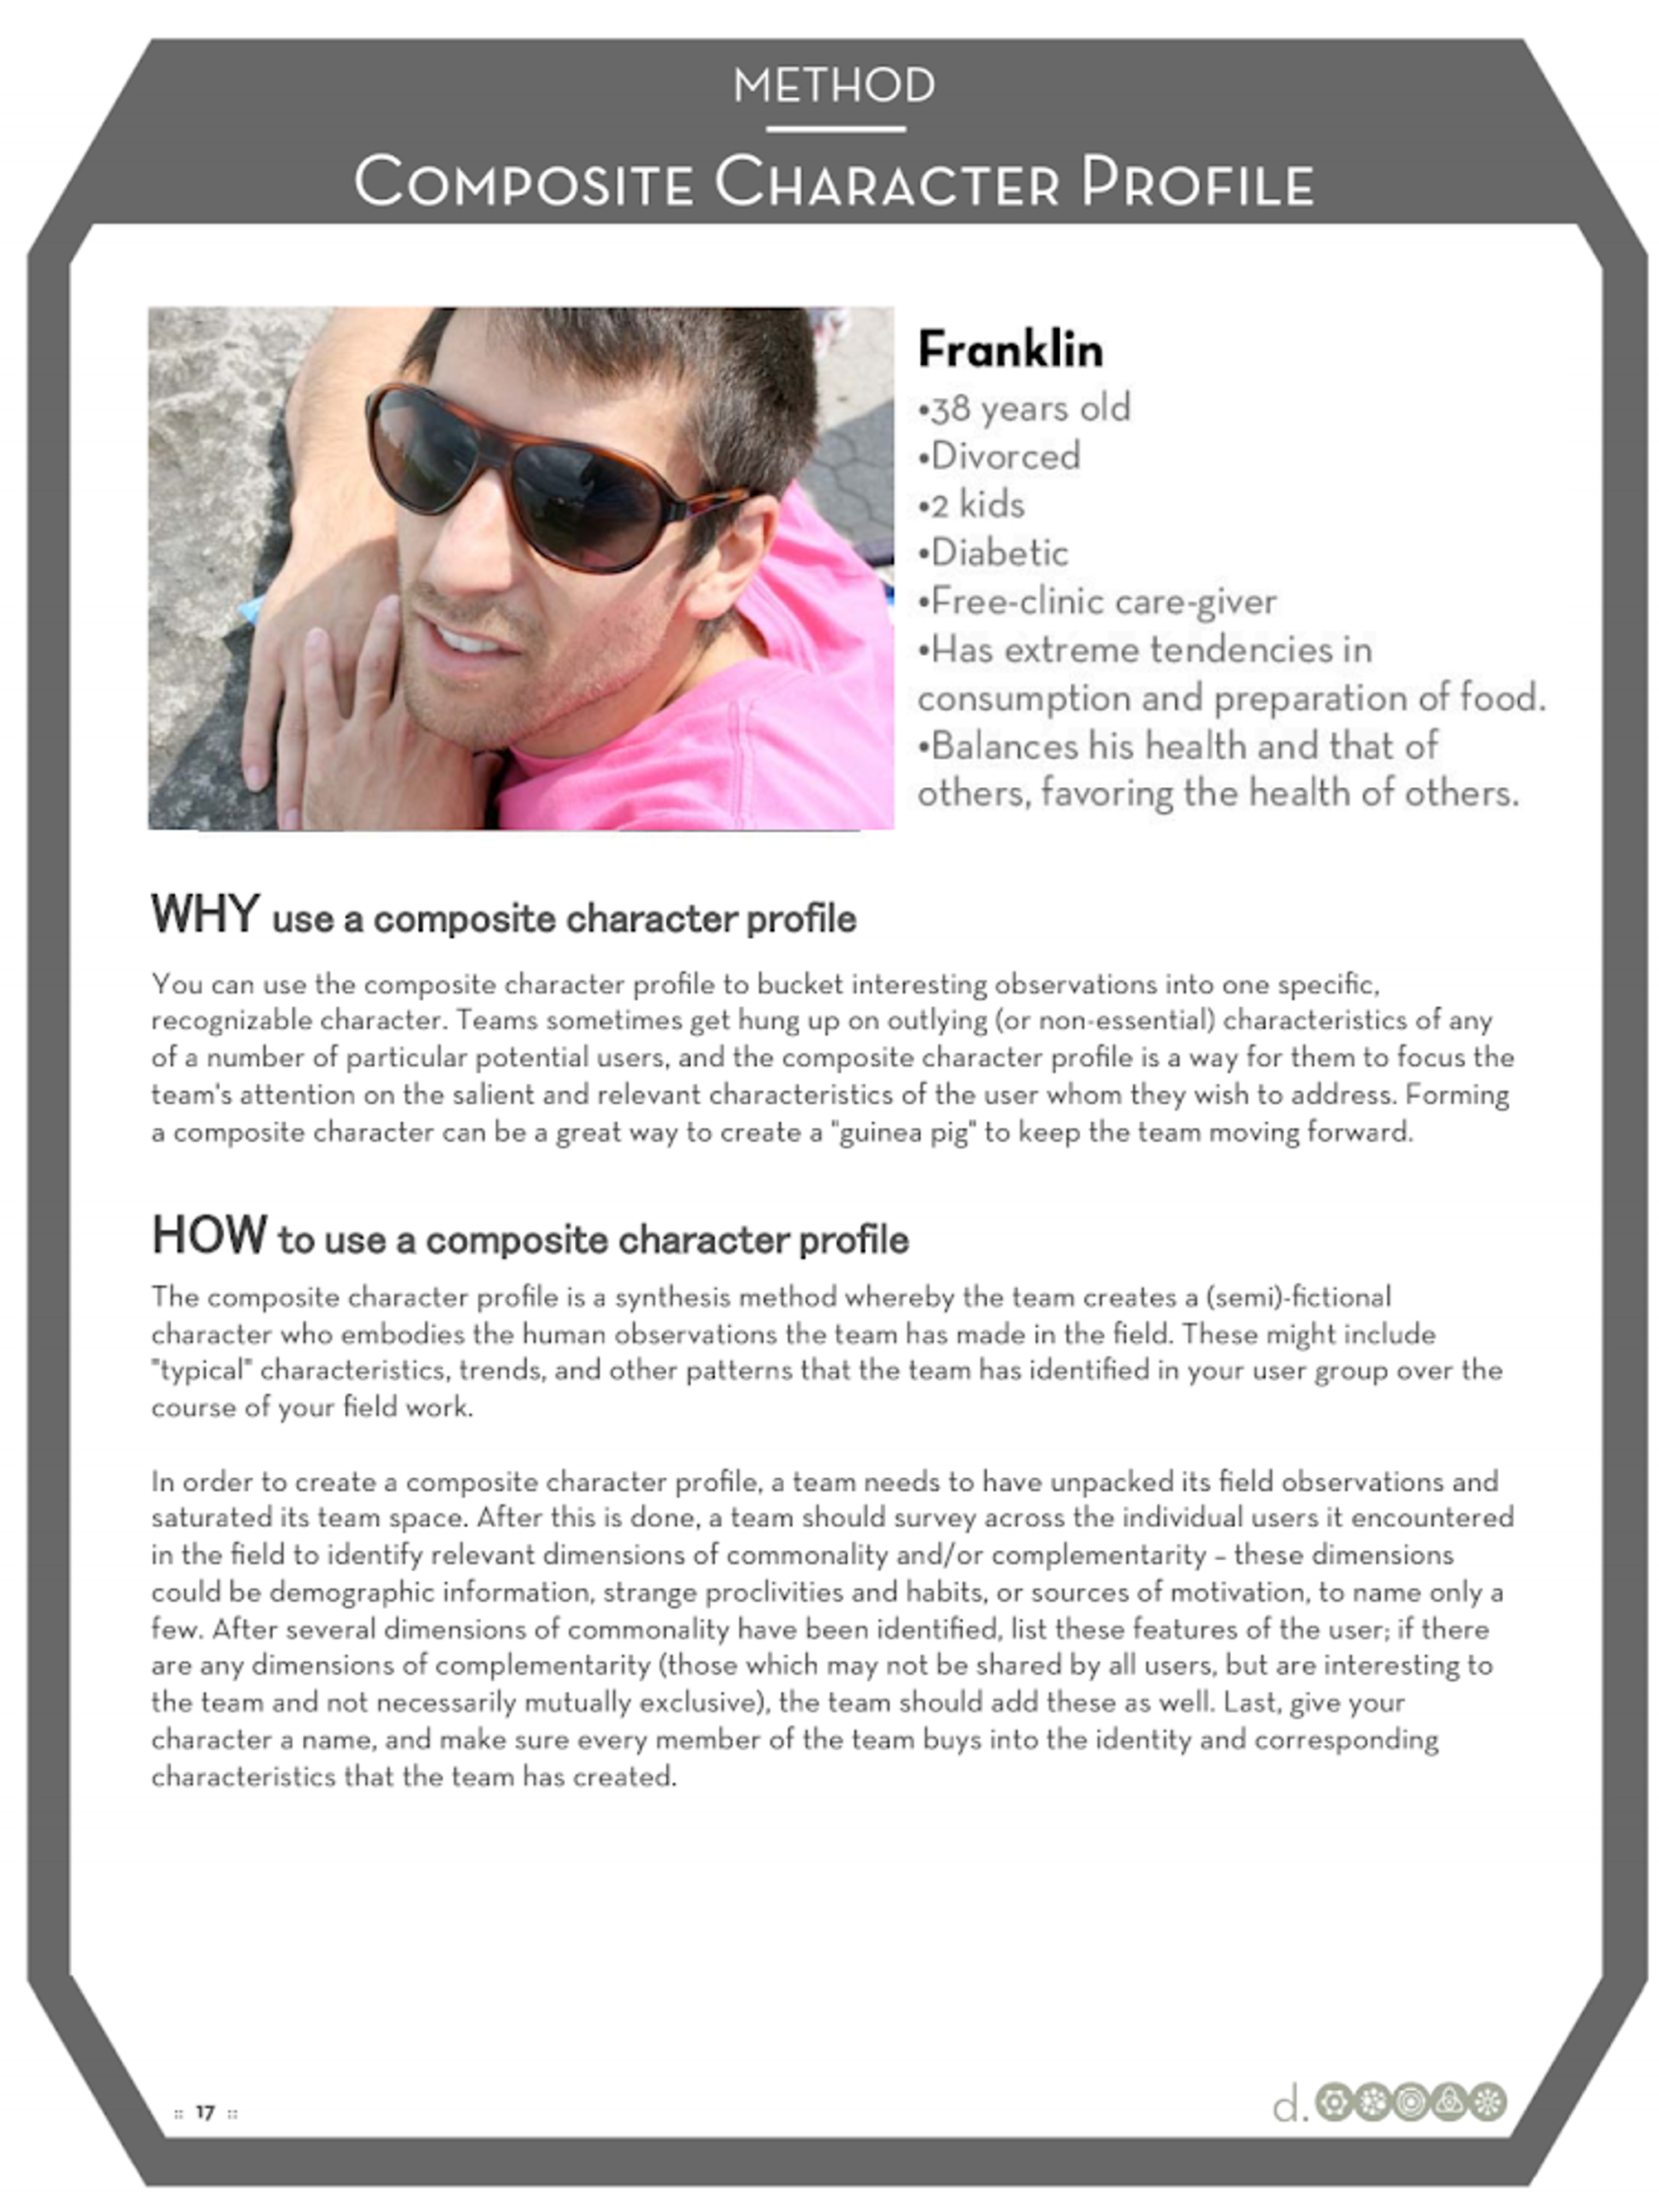 3A - Design Thinking - Defining Methods - Composite Character Profile.pdf